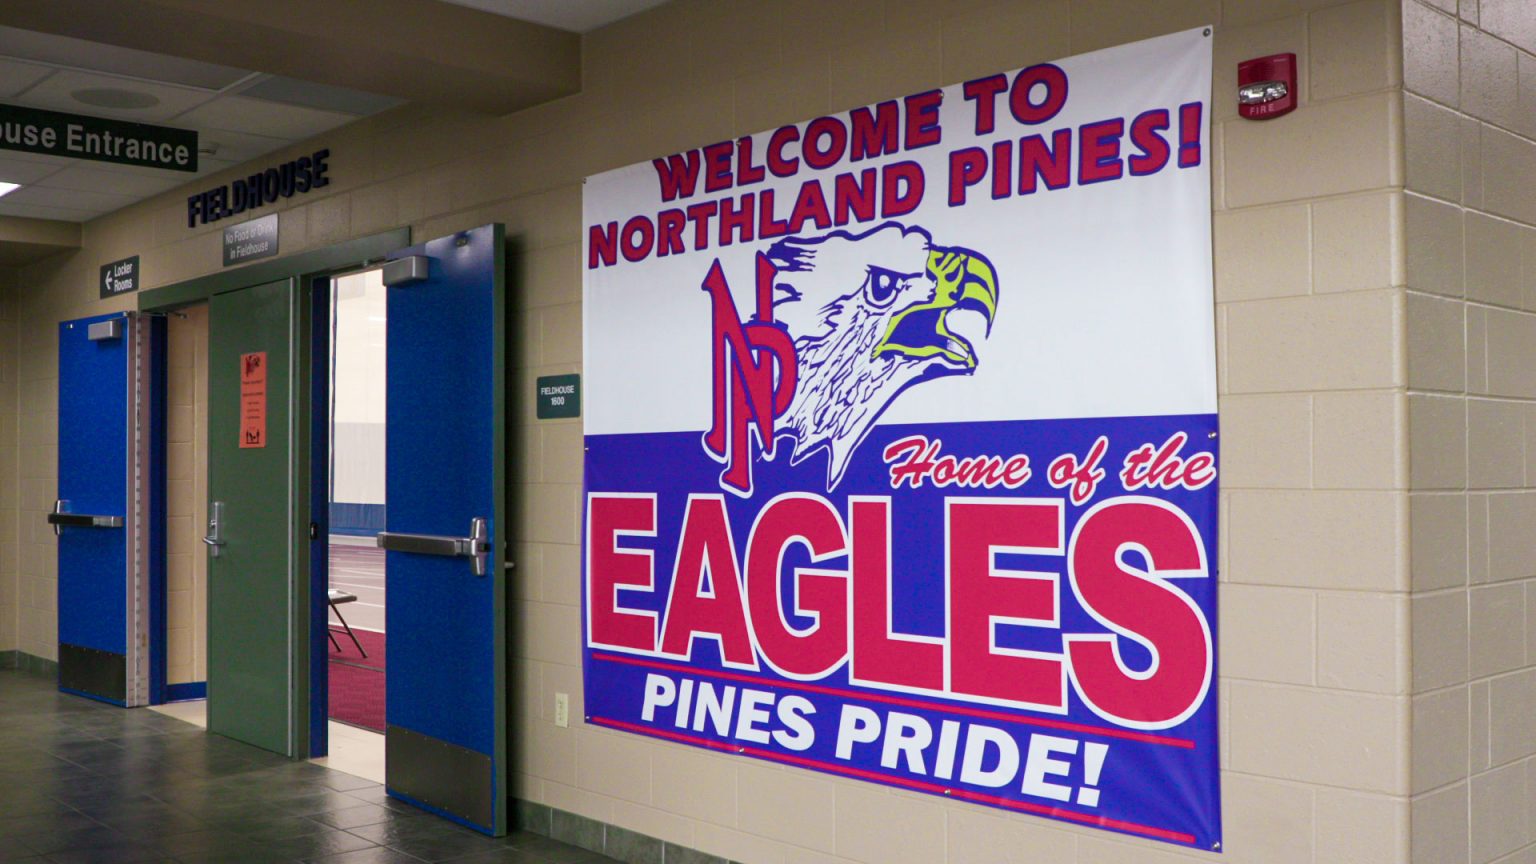 Northland Pines Home of the Eagles banner in high school hallway